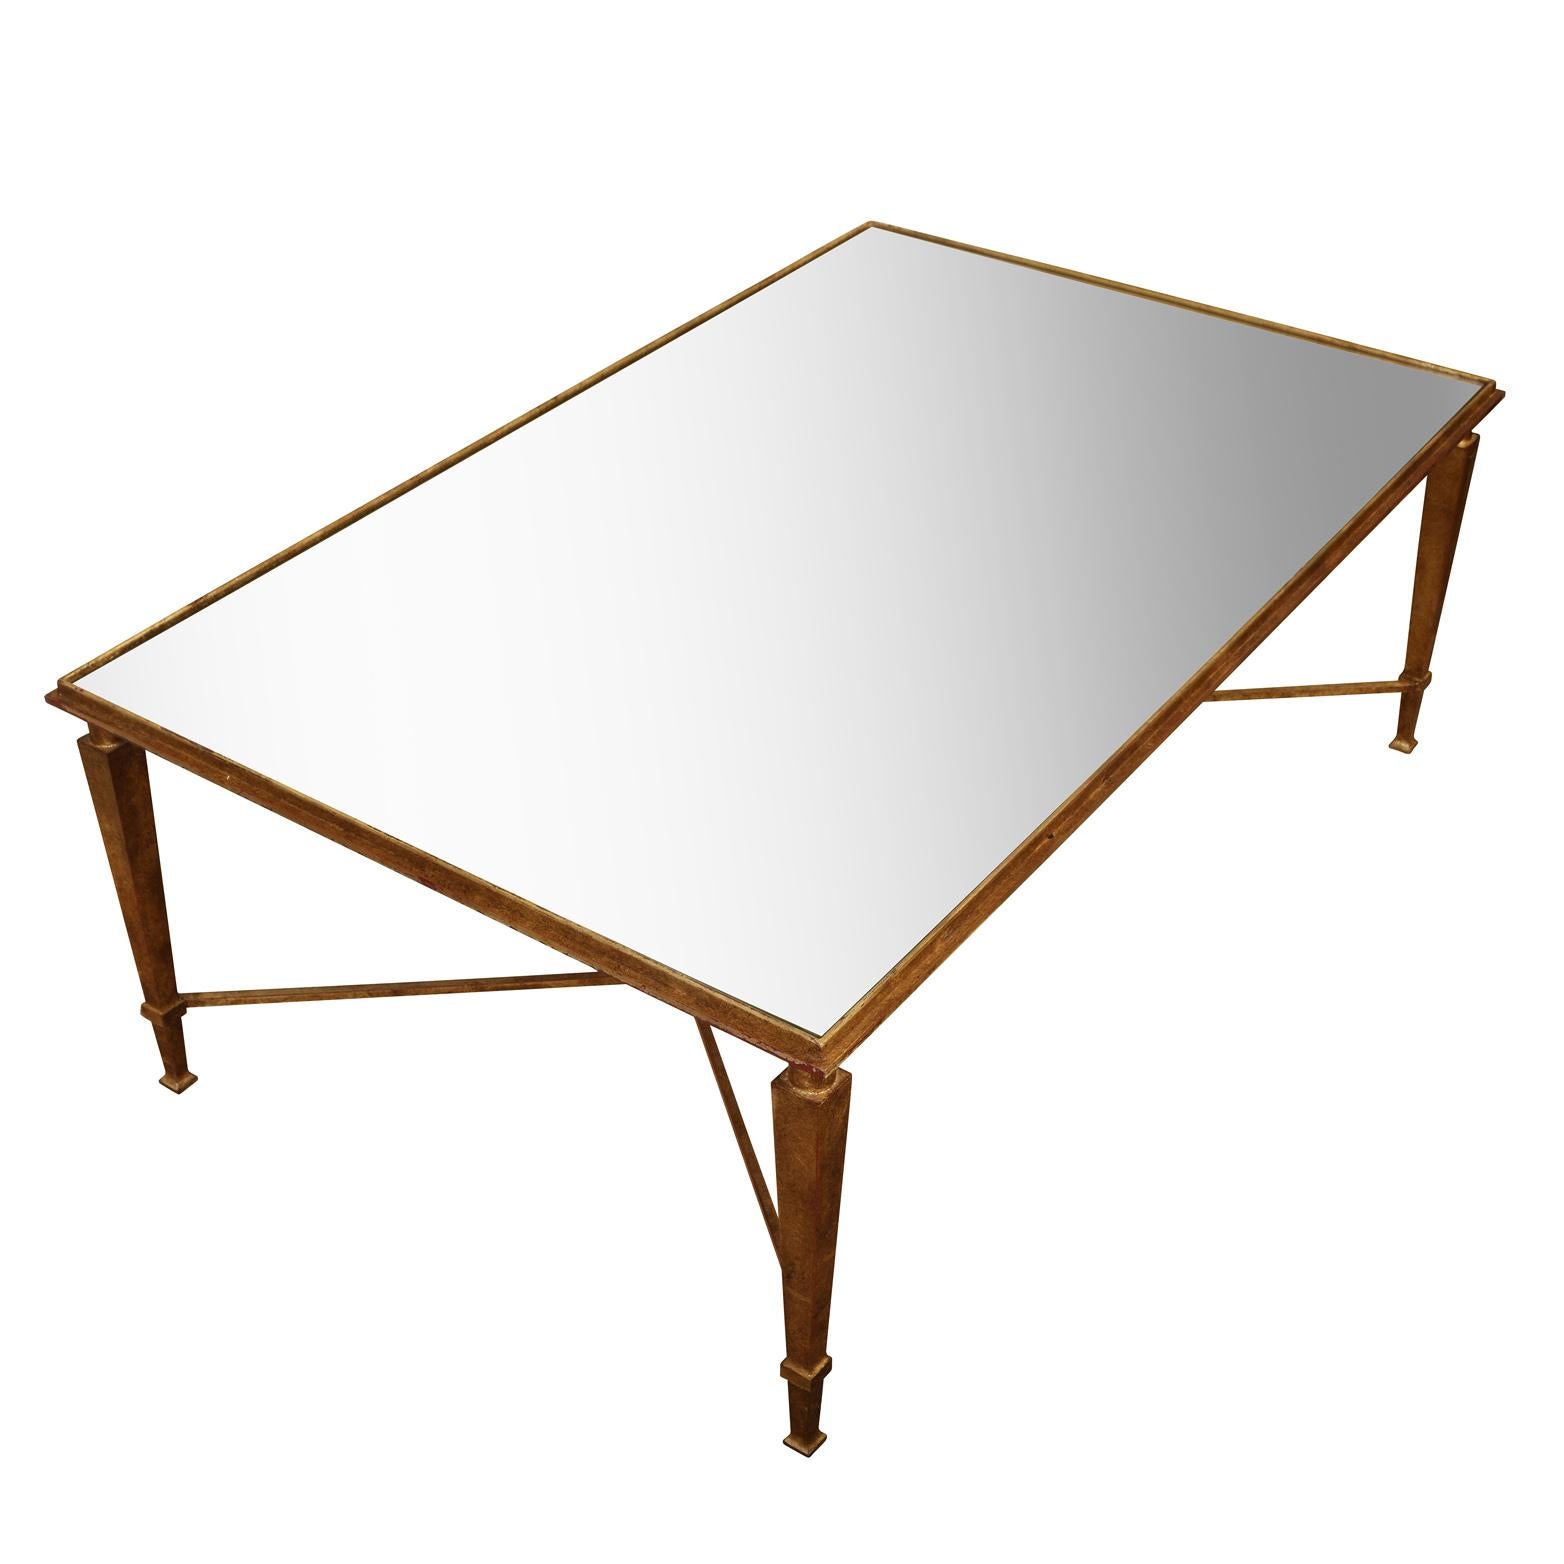 20th Century Gilt Metal French Style Coffee Table with Mirror Top For Sale